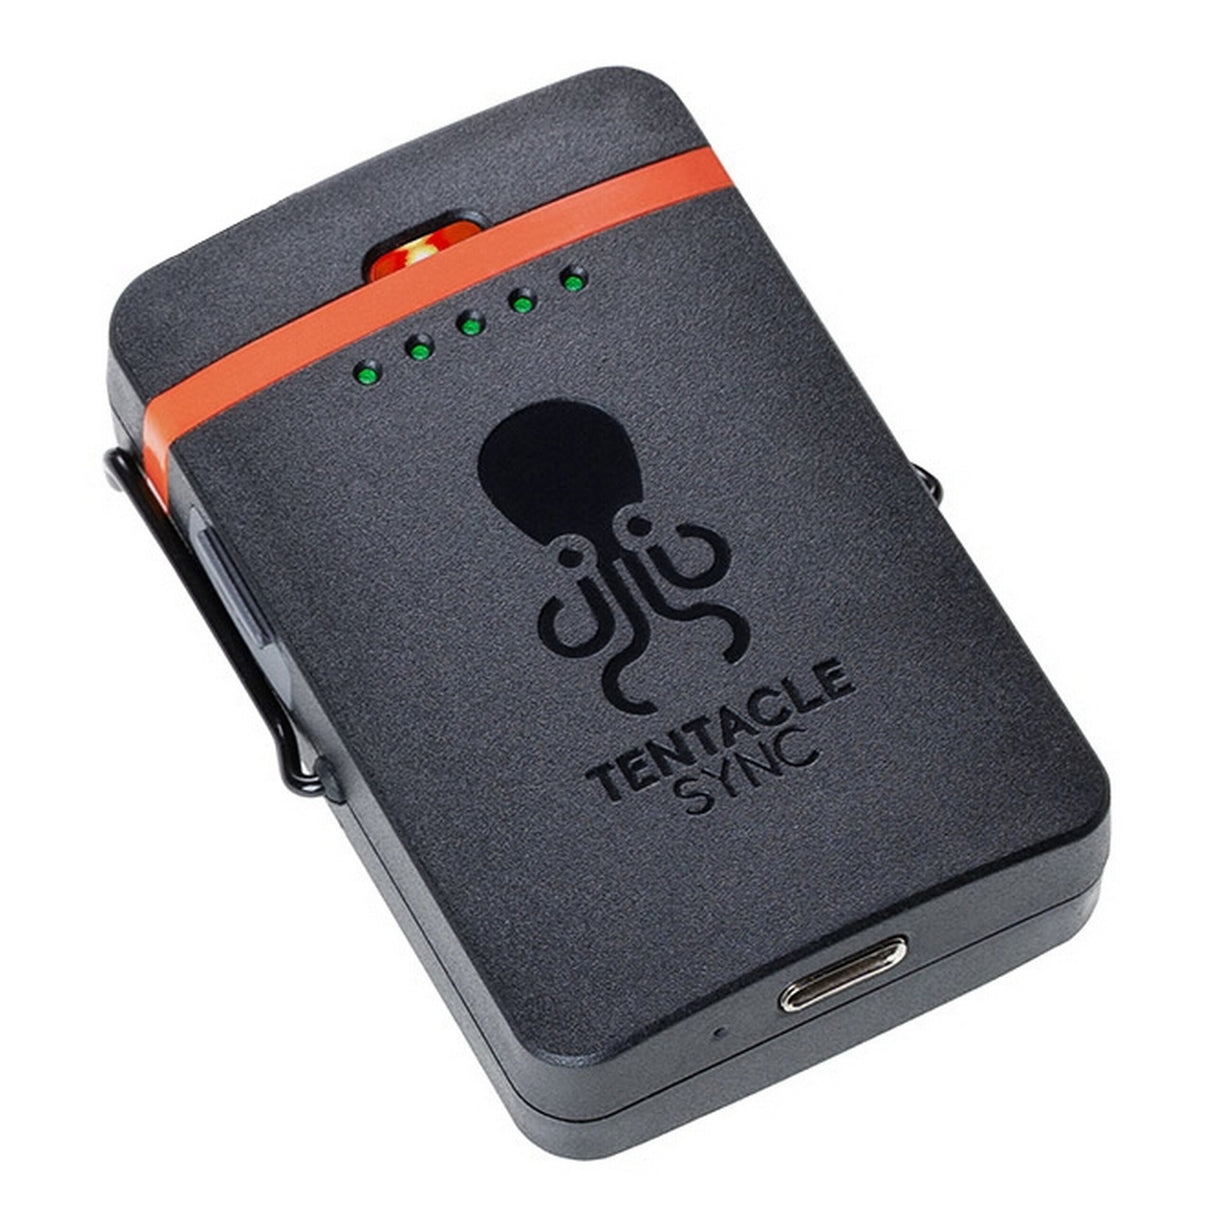 Tentacle Sync Track E Pocket Audio Recorder, Recorder Only